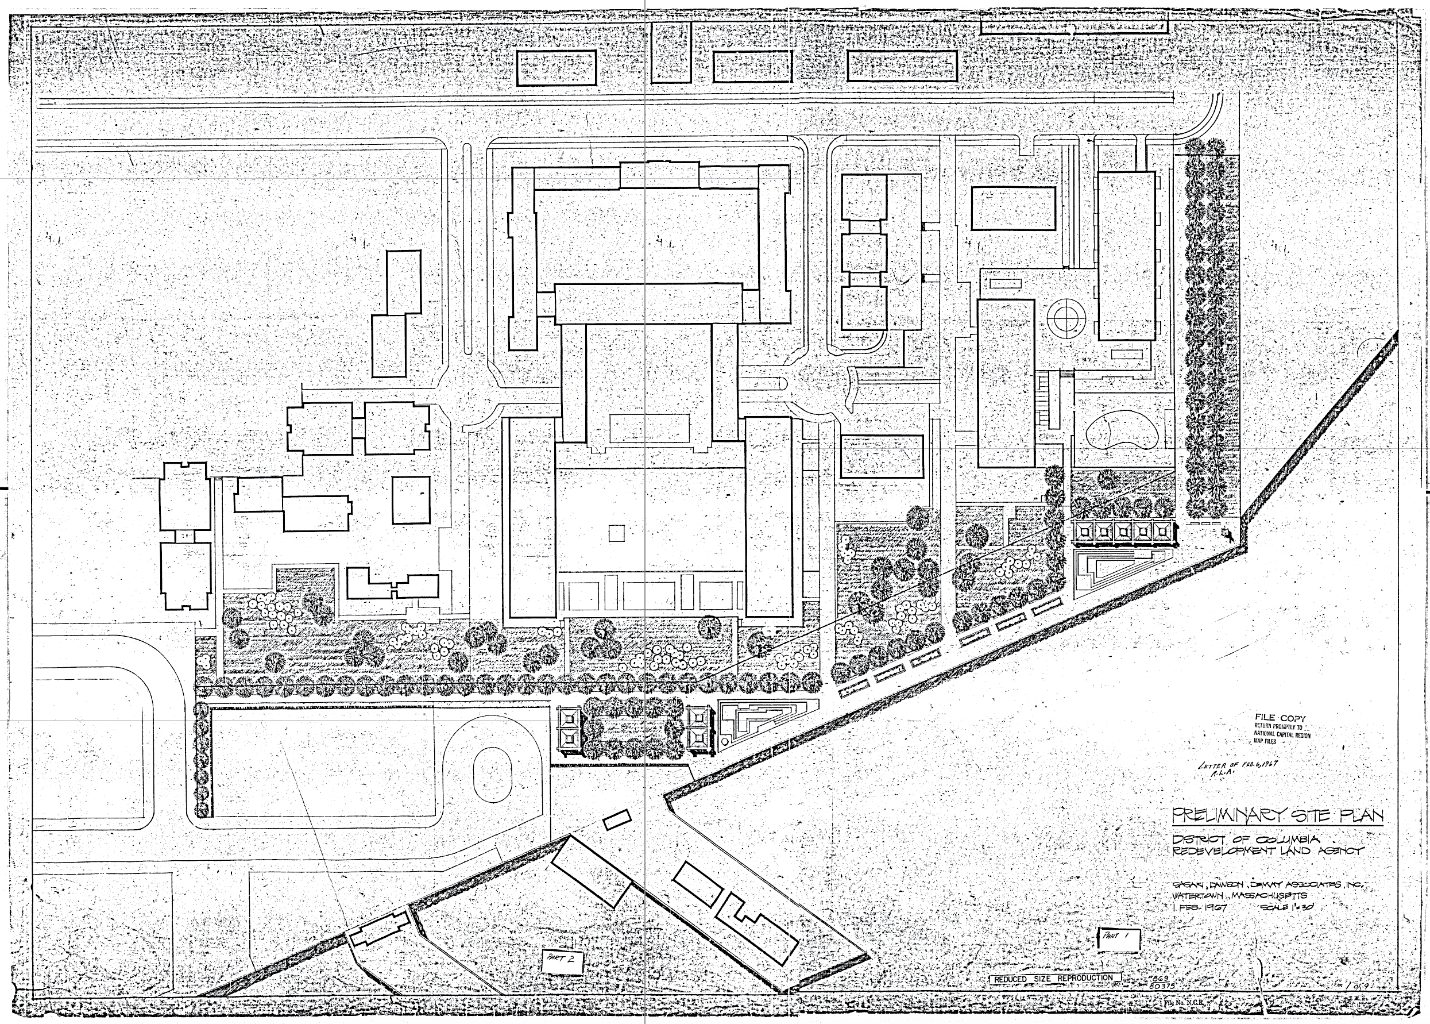  Sasaki, Dawson &amp; DeMay’s preliminary site plan for the Titanic Memorial Park cultural landscape called for tree-lined promenades, a northern lawn anchored by pavilions, two play areas, a southern row of pavilions, and a downsized Titanic Memoria